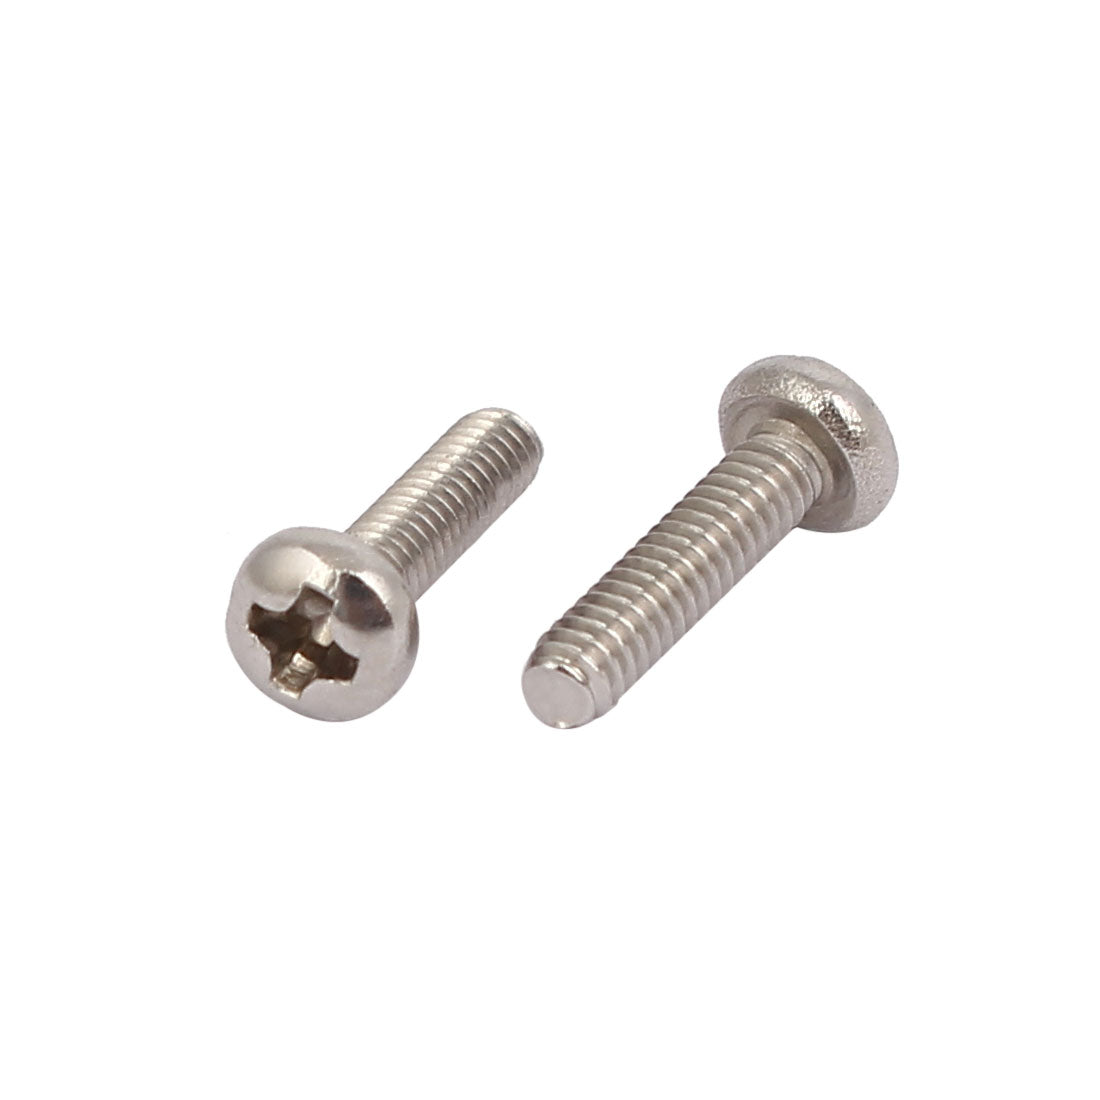 uxcell Uxcell M2x8mm 316 Stainless Steel Phillips Round Pan Head Machine Screw Bolt 60pcs